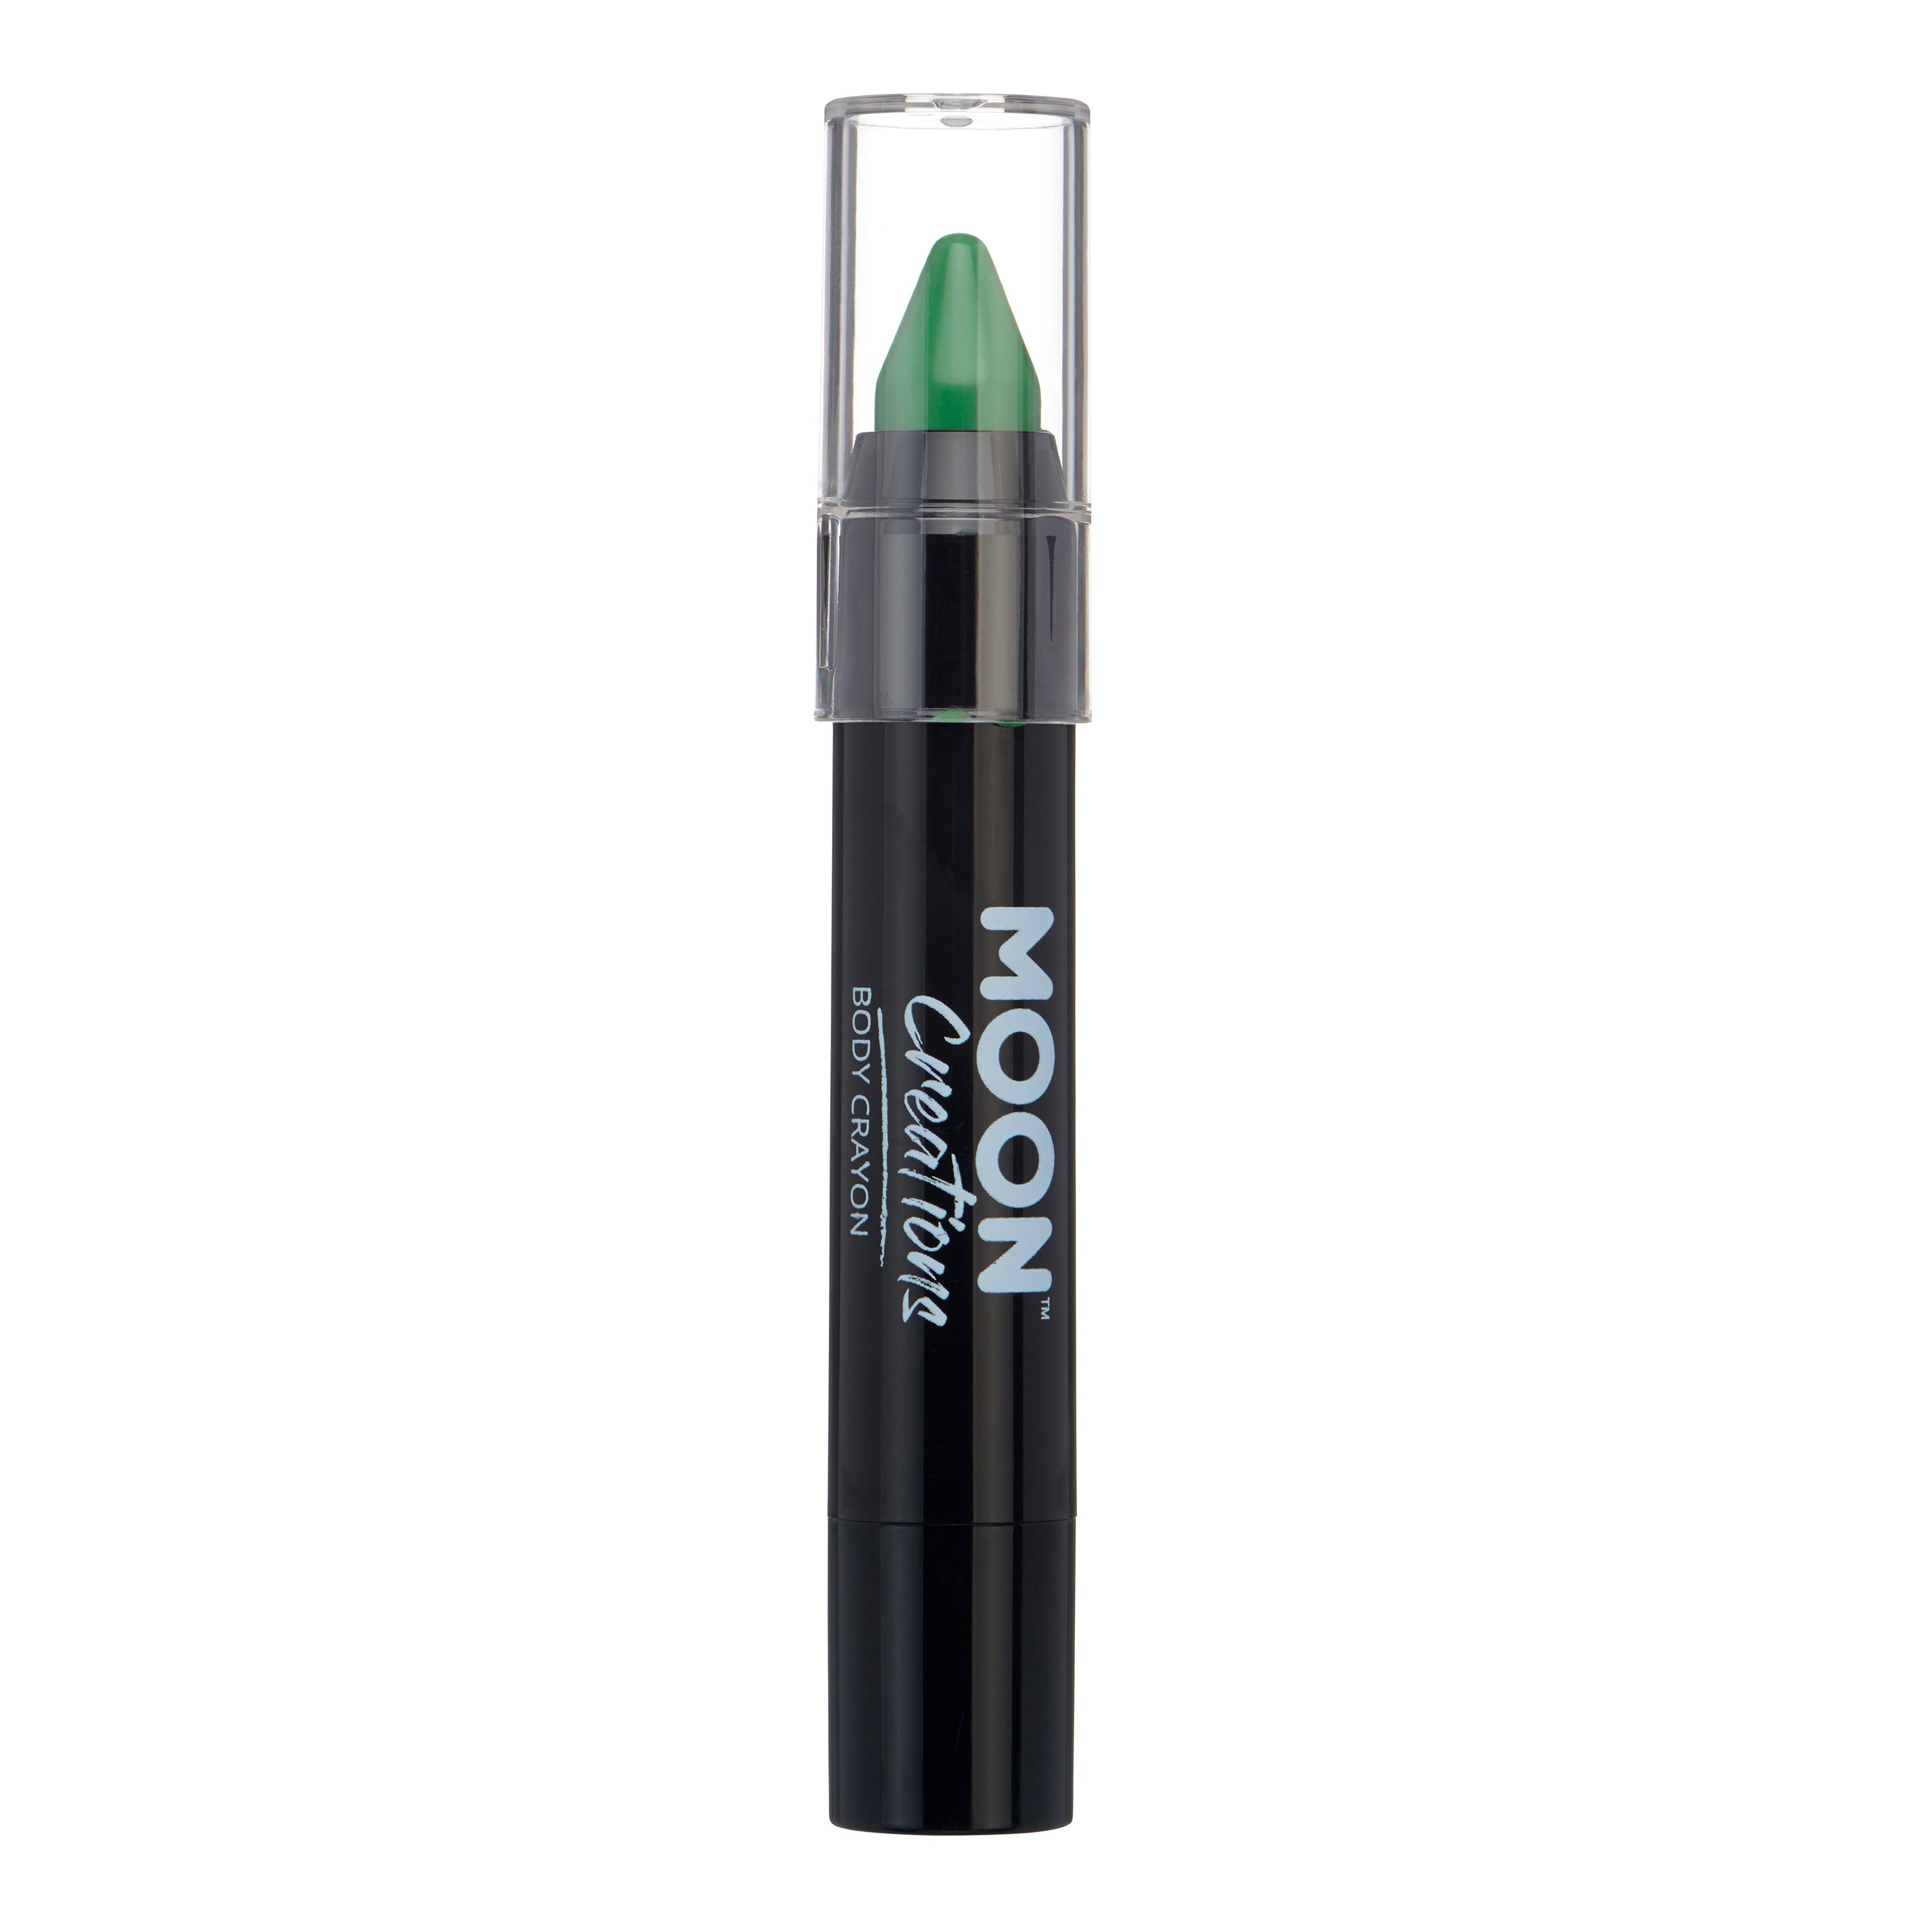 Green - Face & Body Crayon, 3.5g. Cosmetically certified, FDA & Health Canada compliant and cruelty free.